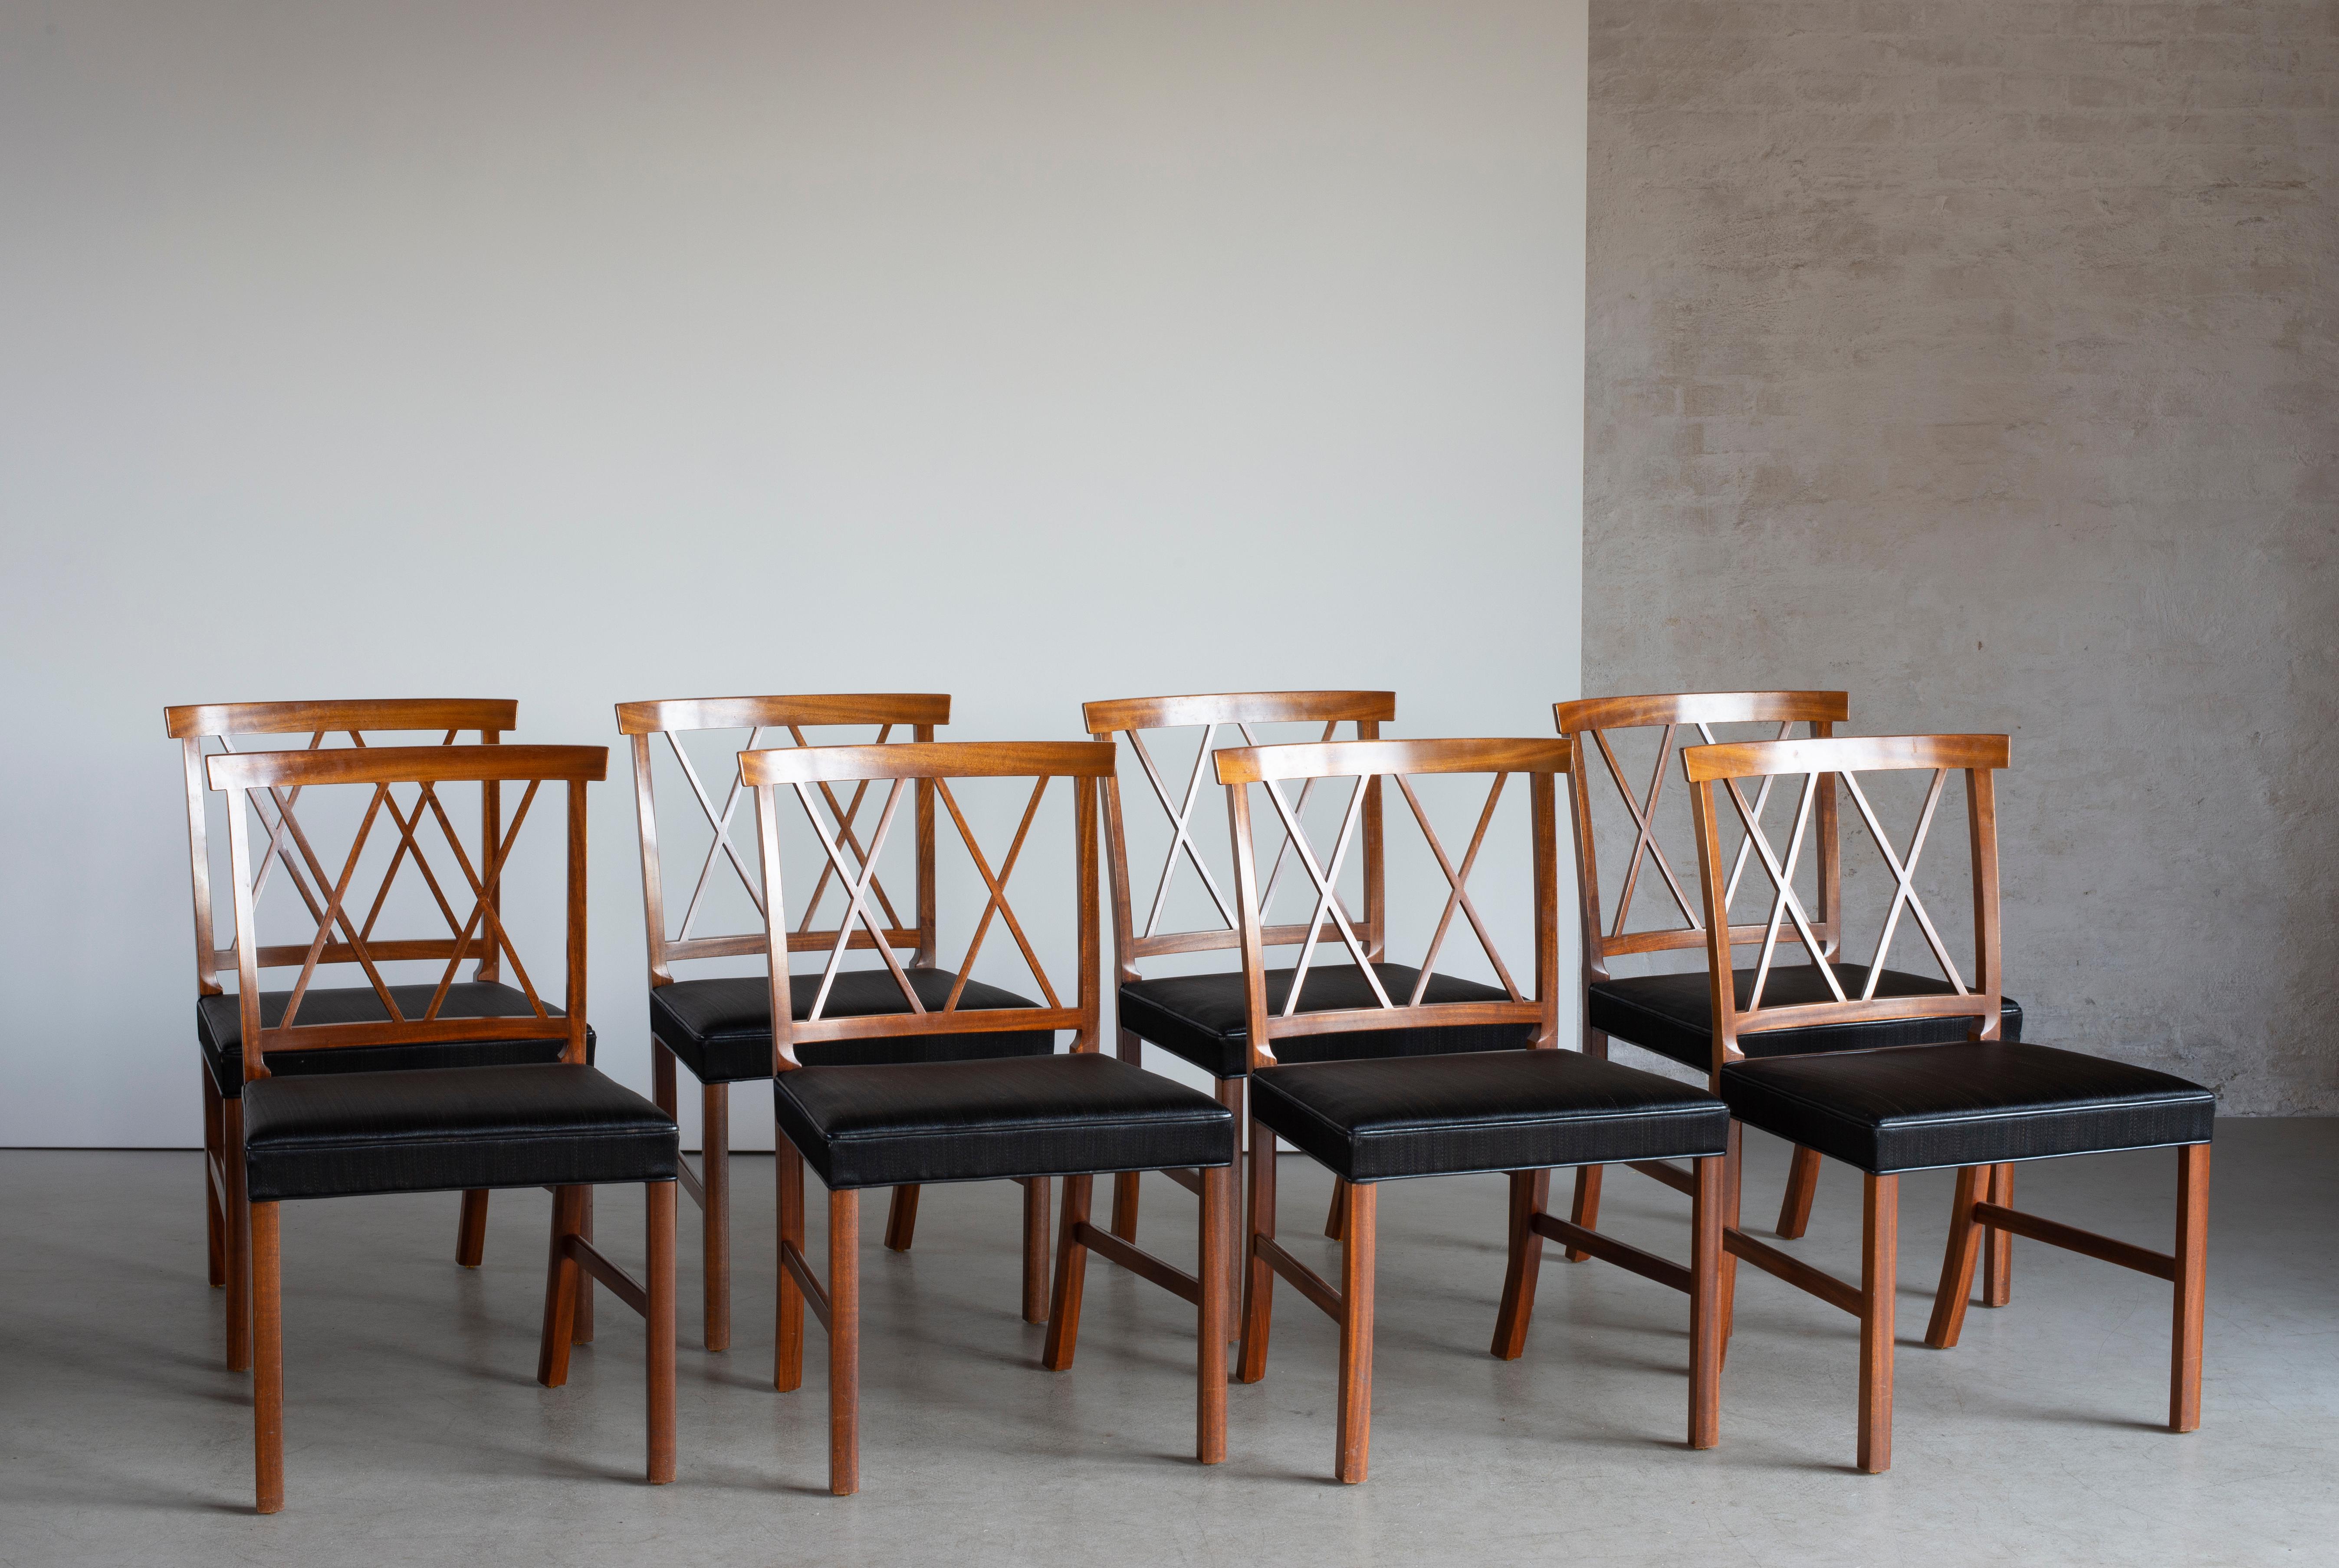 Ole Wanscher set of eight chairs in mahogany with seats of black horsehair. Executed by A. J. Iversen, Copenhagen, Denmark.